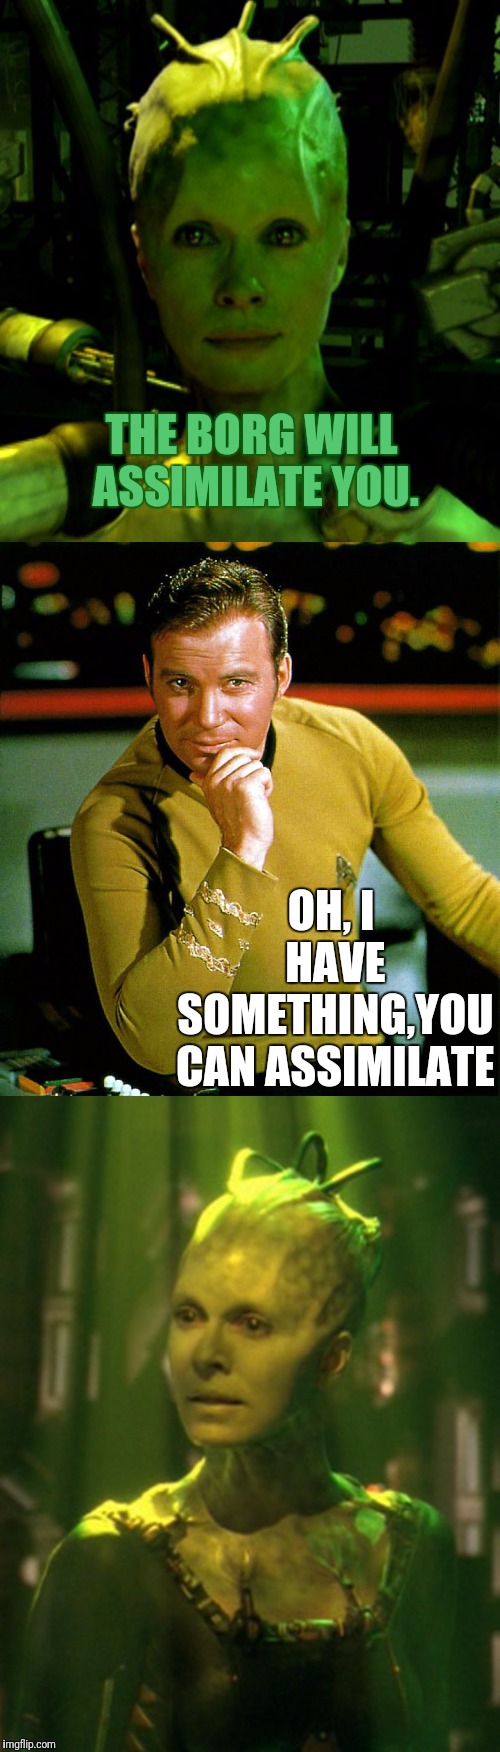 Kirk Date Night |  THE BORG WILL ASSIMILATE YOU. OH, I HAVE SOMETHING,YOU CAN ASSIMILATE | image tagged in star trek,the borg,borg,captain kirk,kirk,first date | made w/ Imgflip meme maker